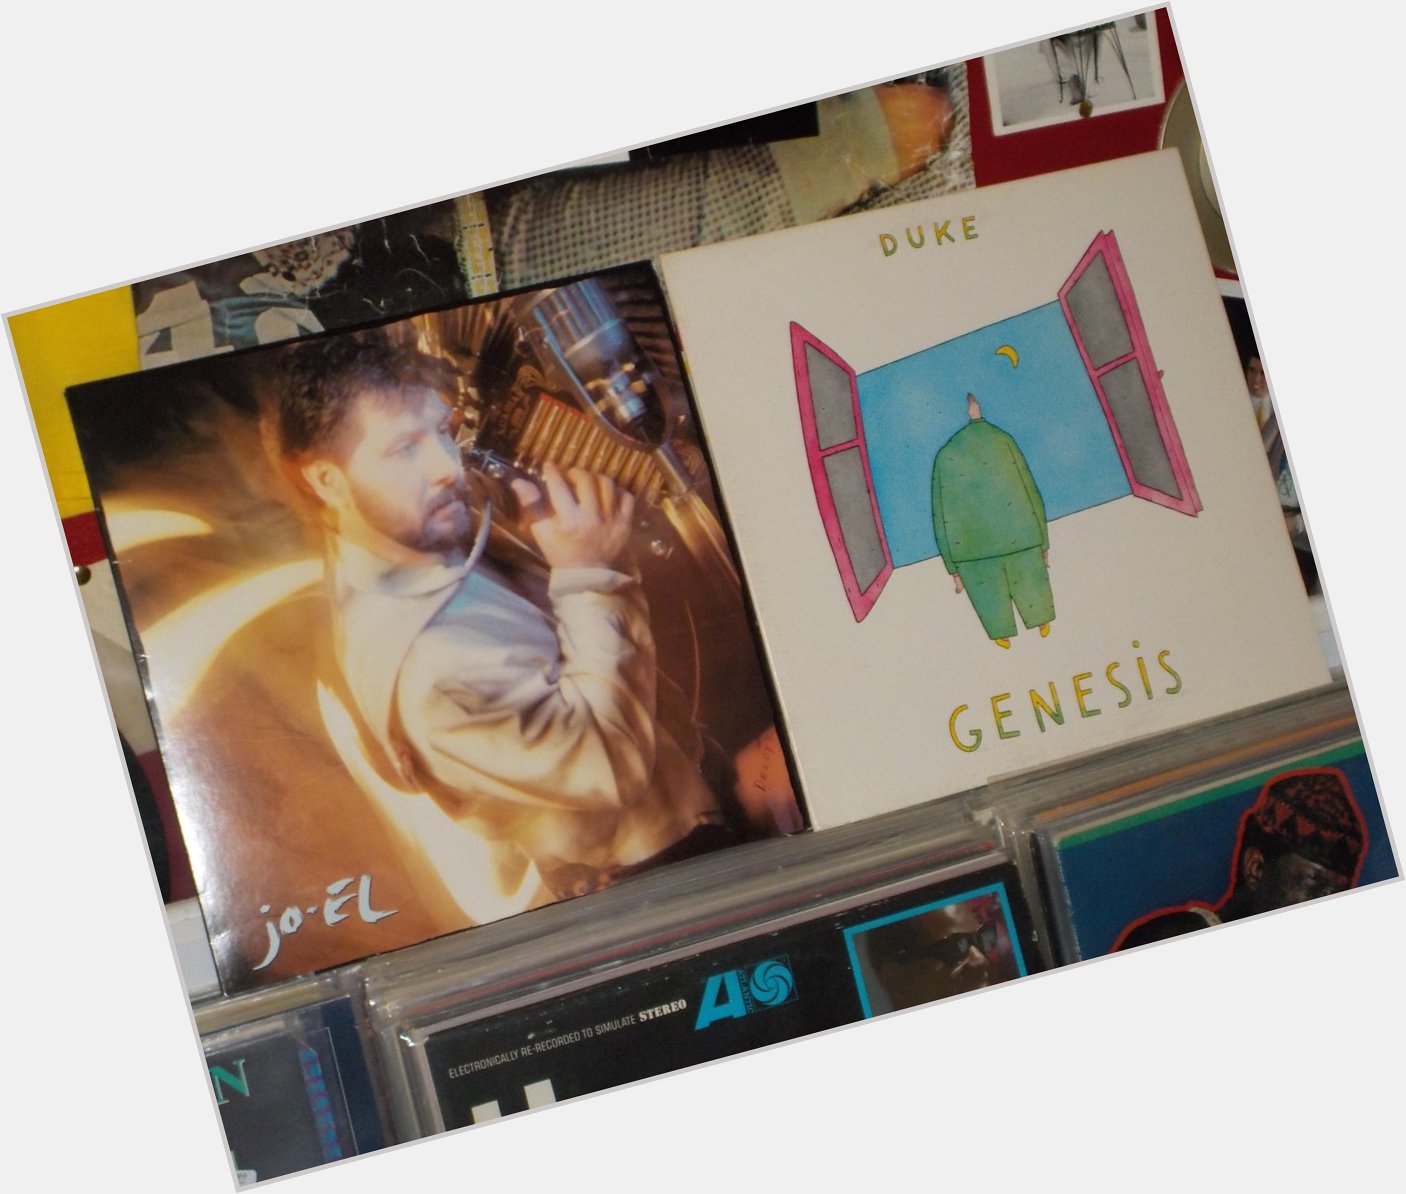 Happy Birthday to Jo-el Sonnier and Michael Rutherford of Genesis 